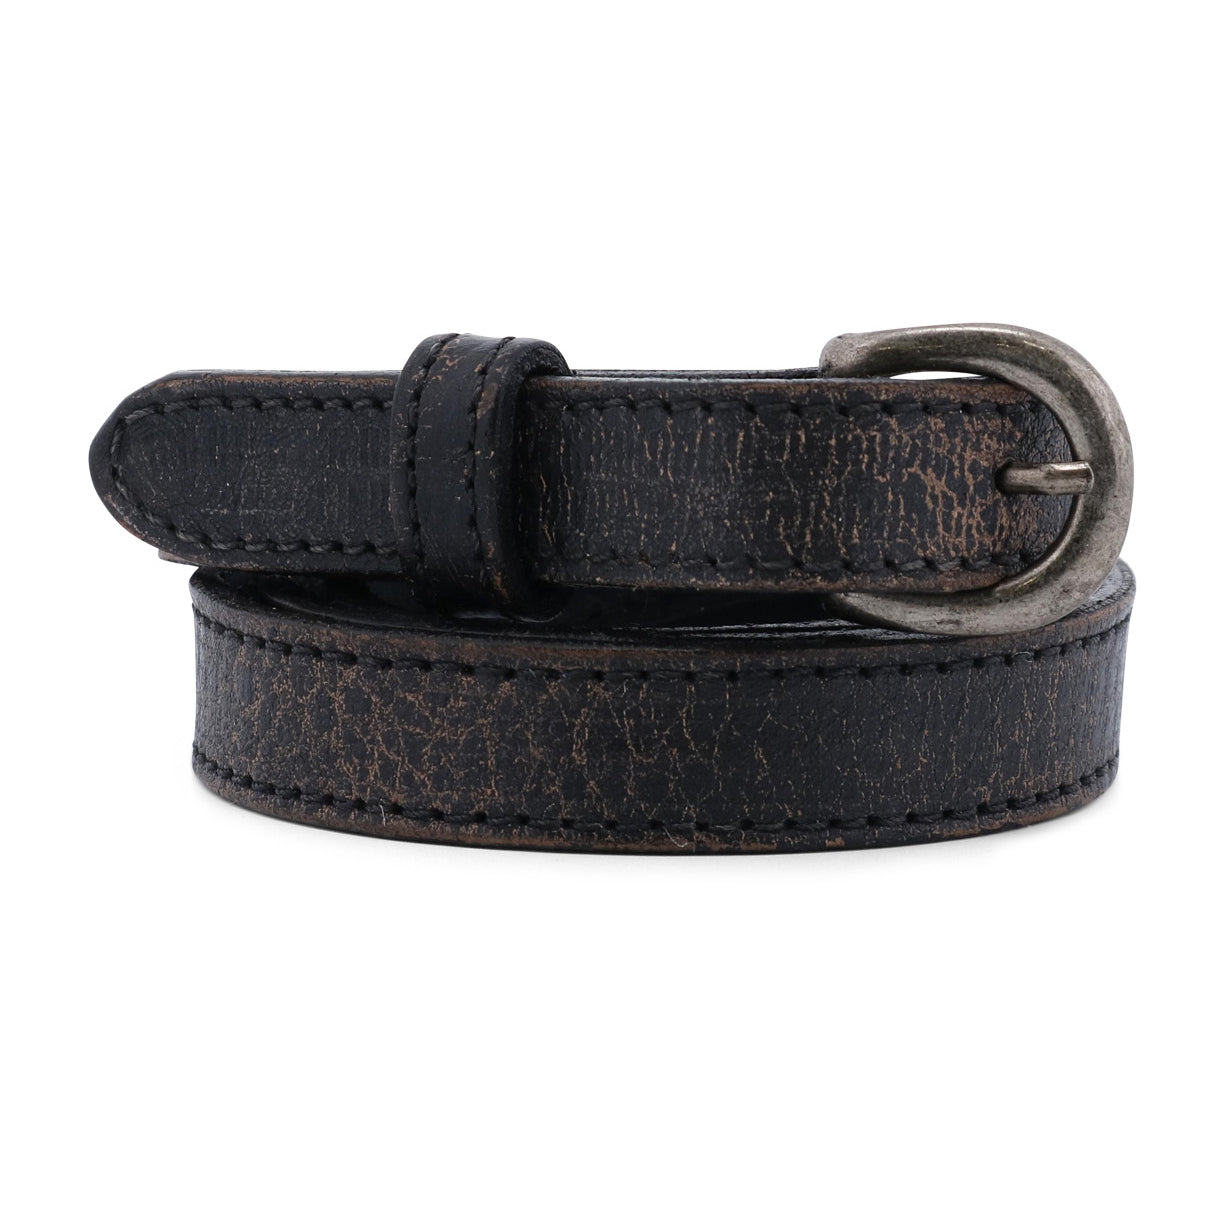 A Monae by Bed Stu black leather belt with a metal buckle.